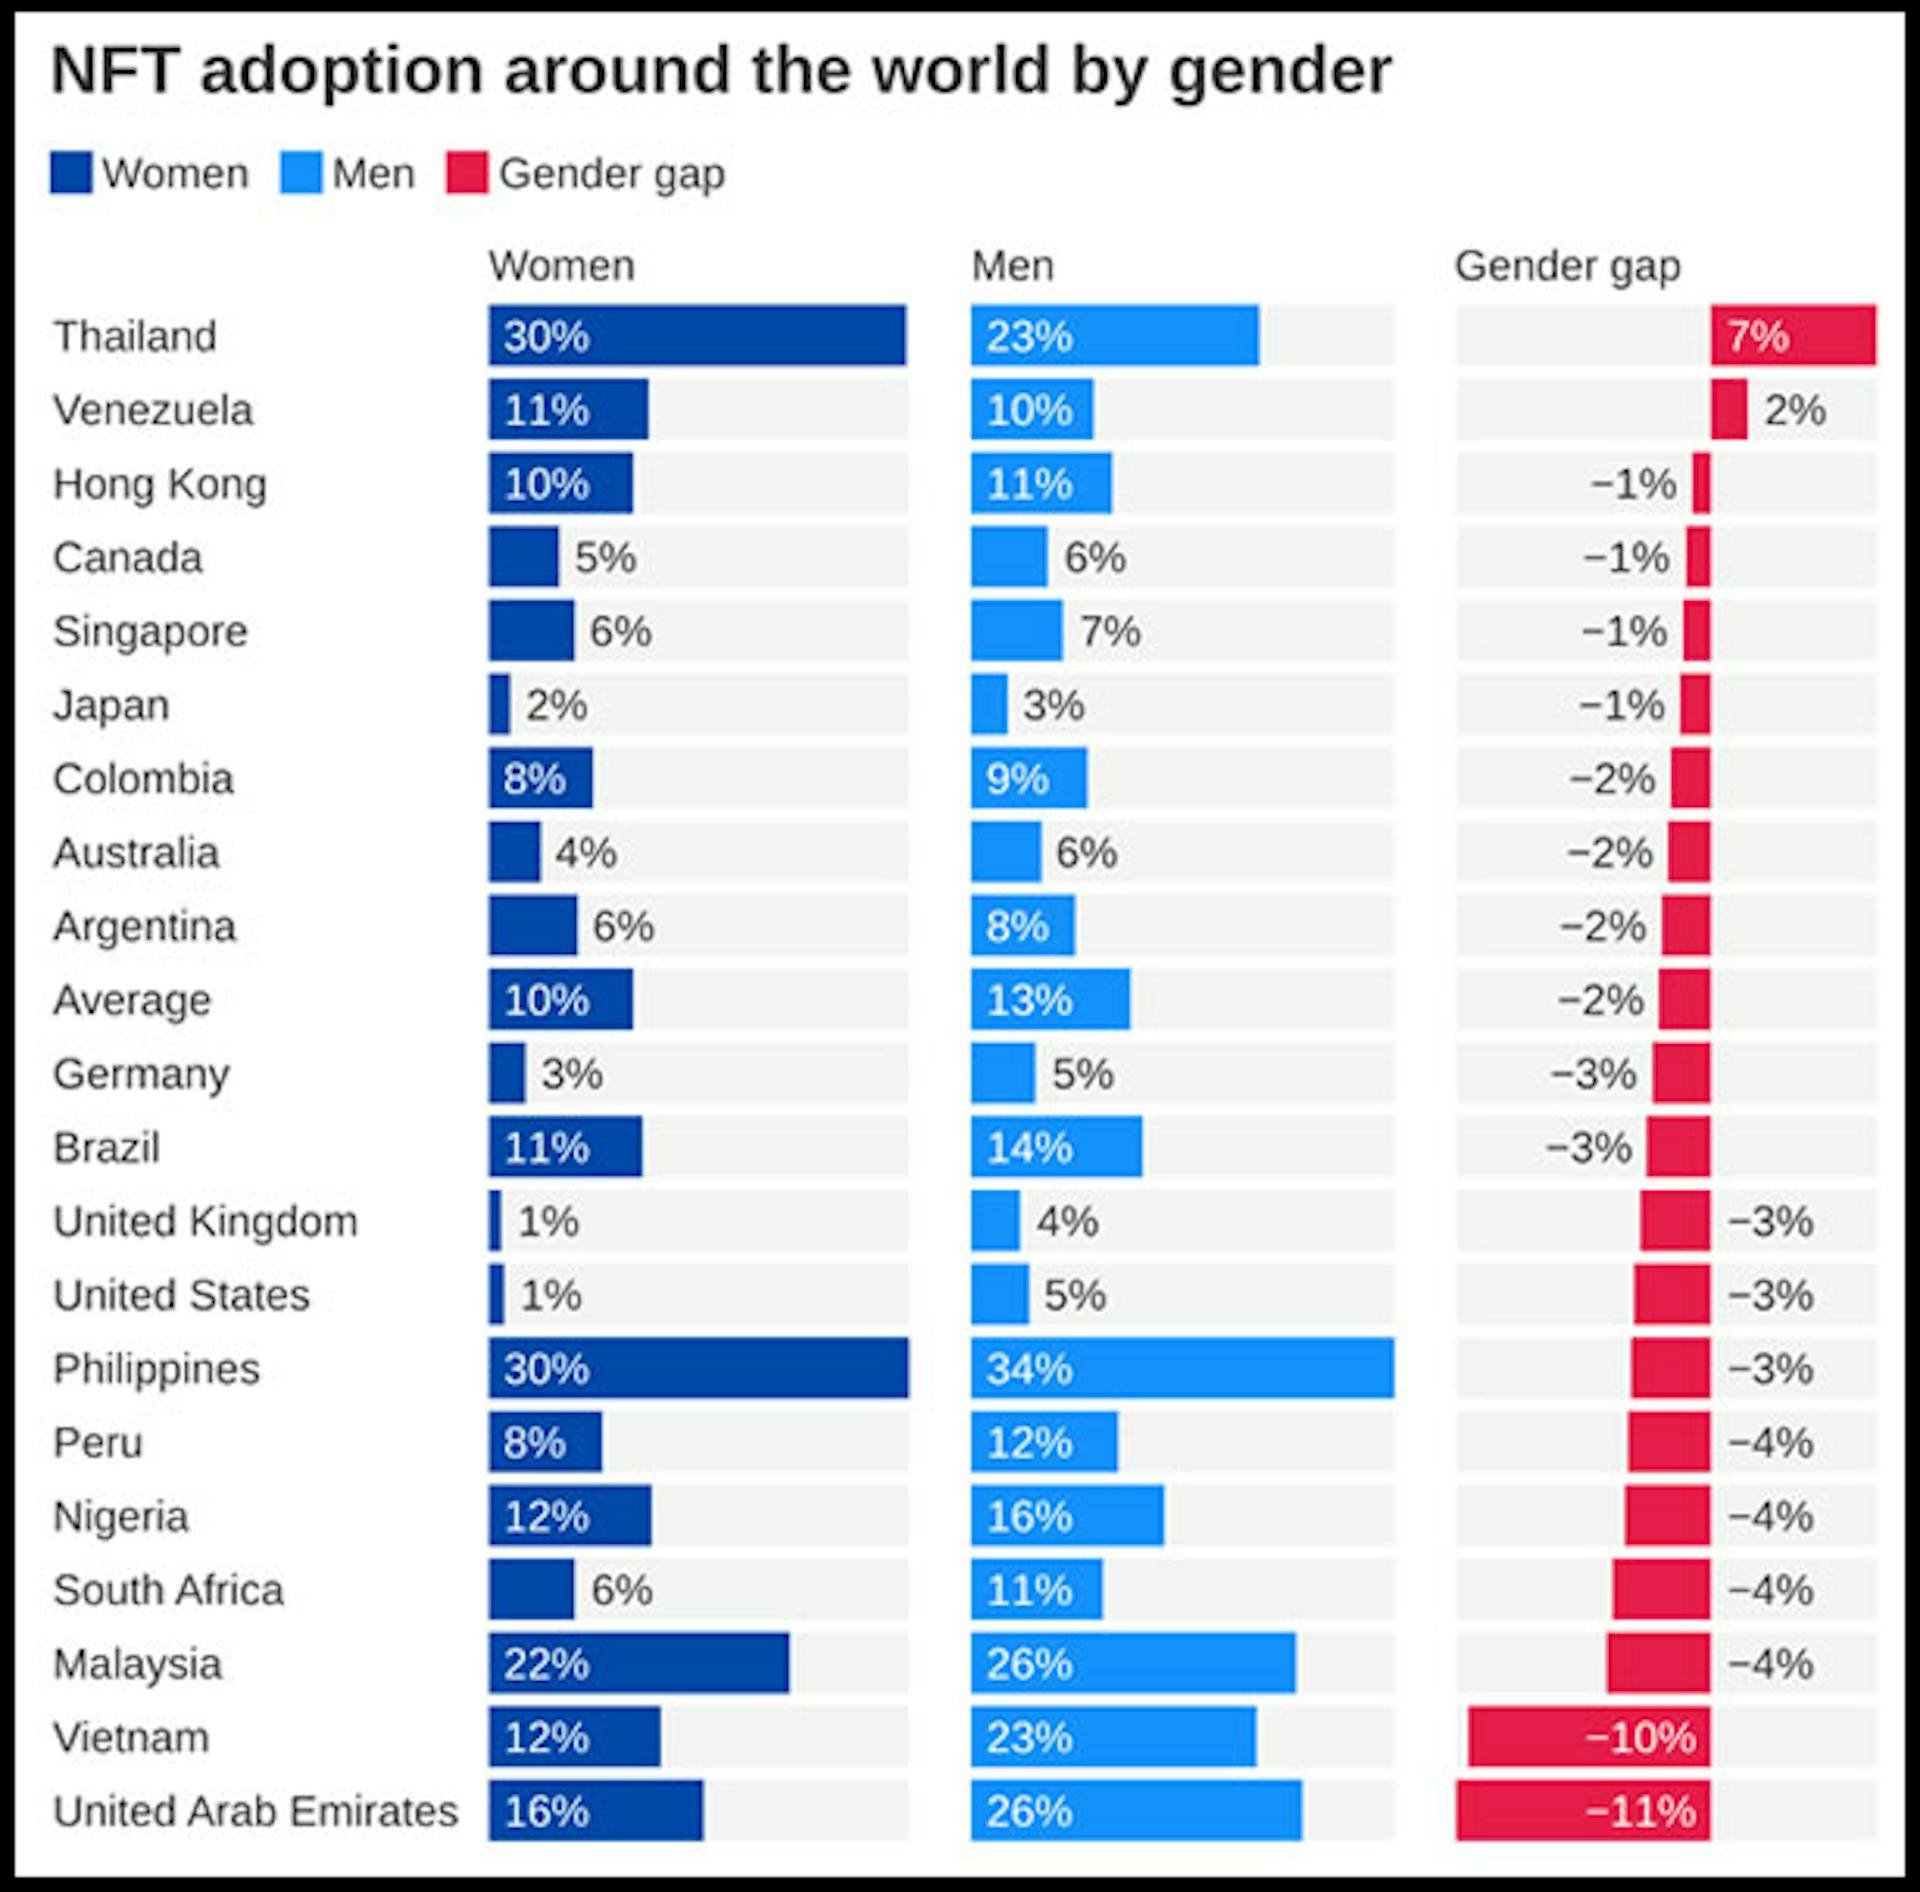 Adoption of NFTs by gender across the globe - Image credit by Finder.com